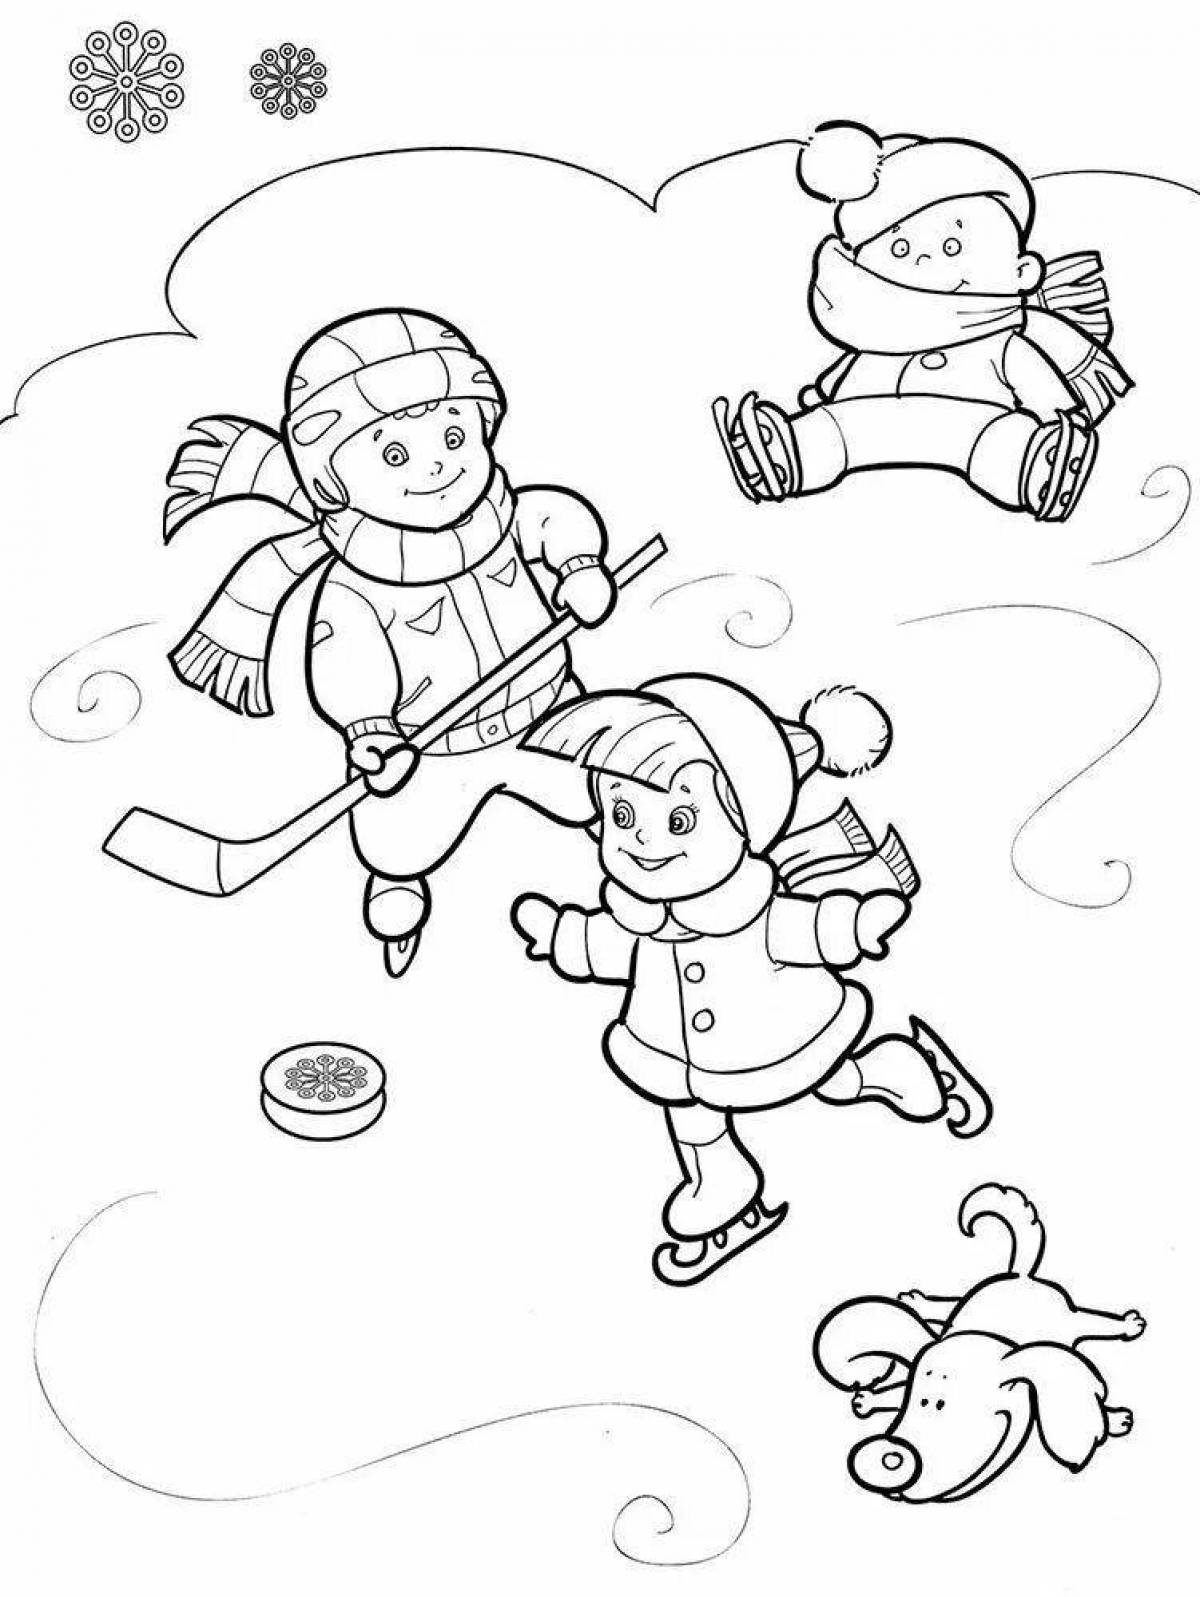 Playful coloring winter games